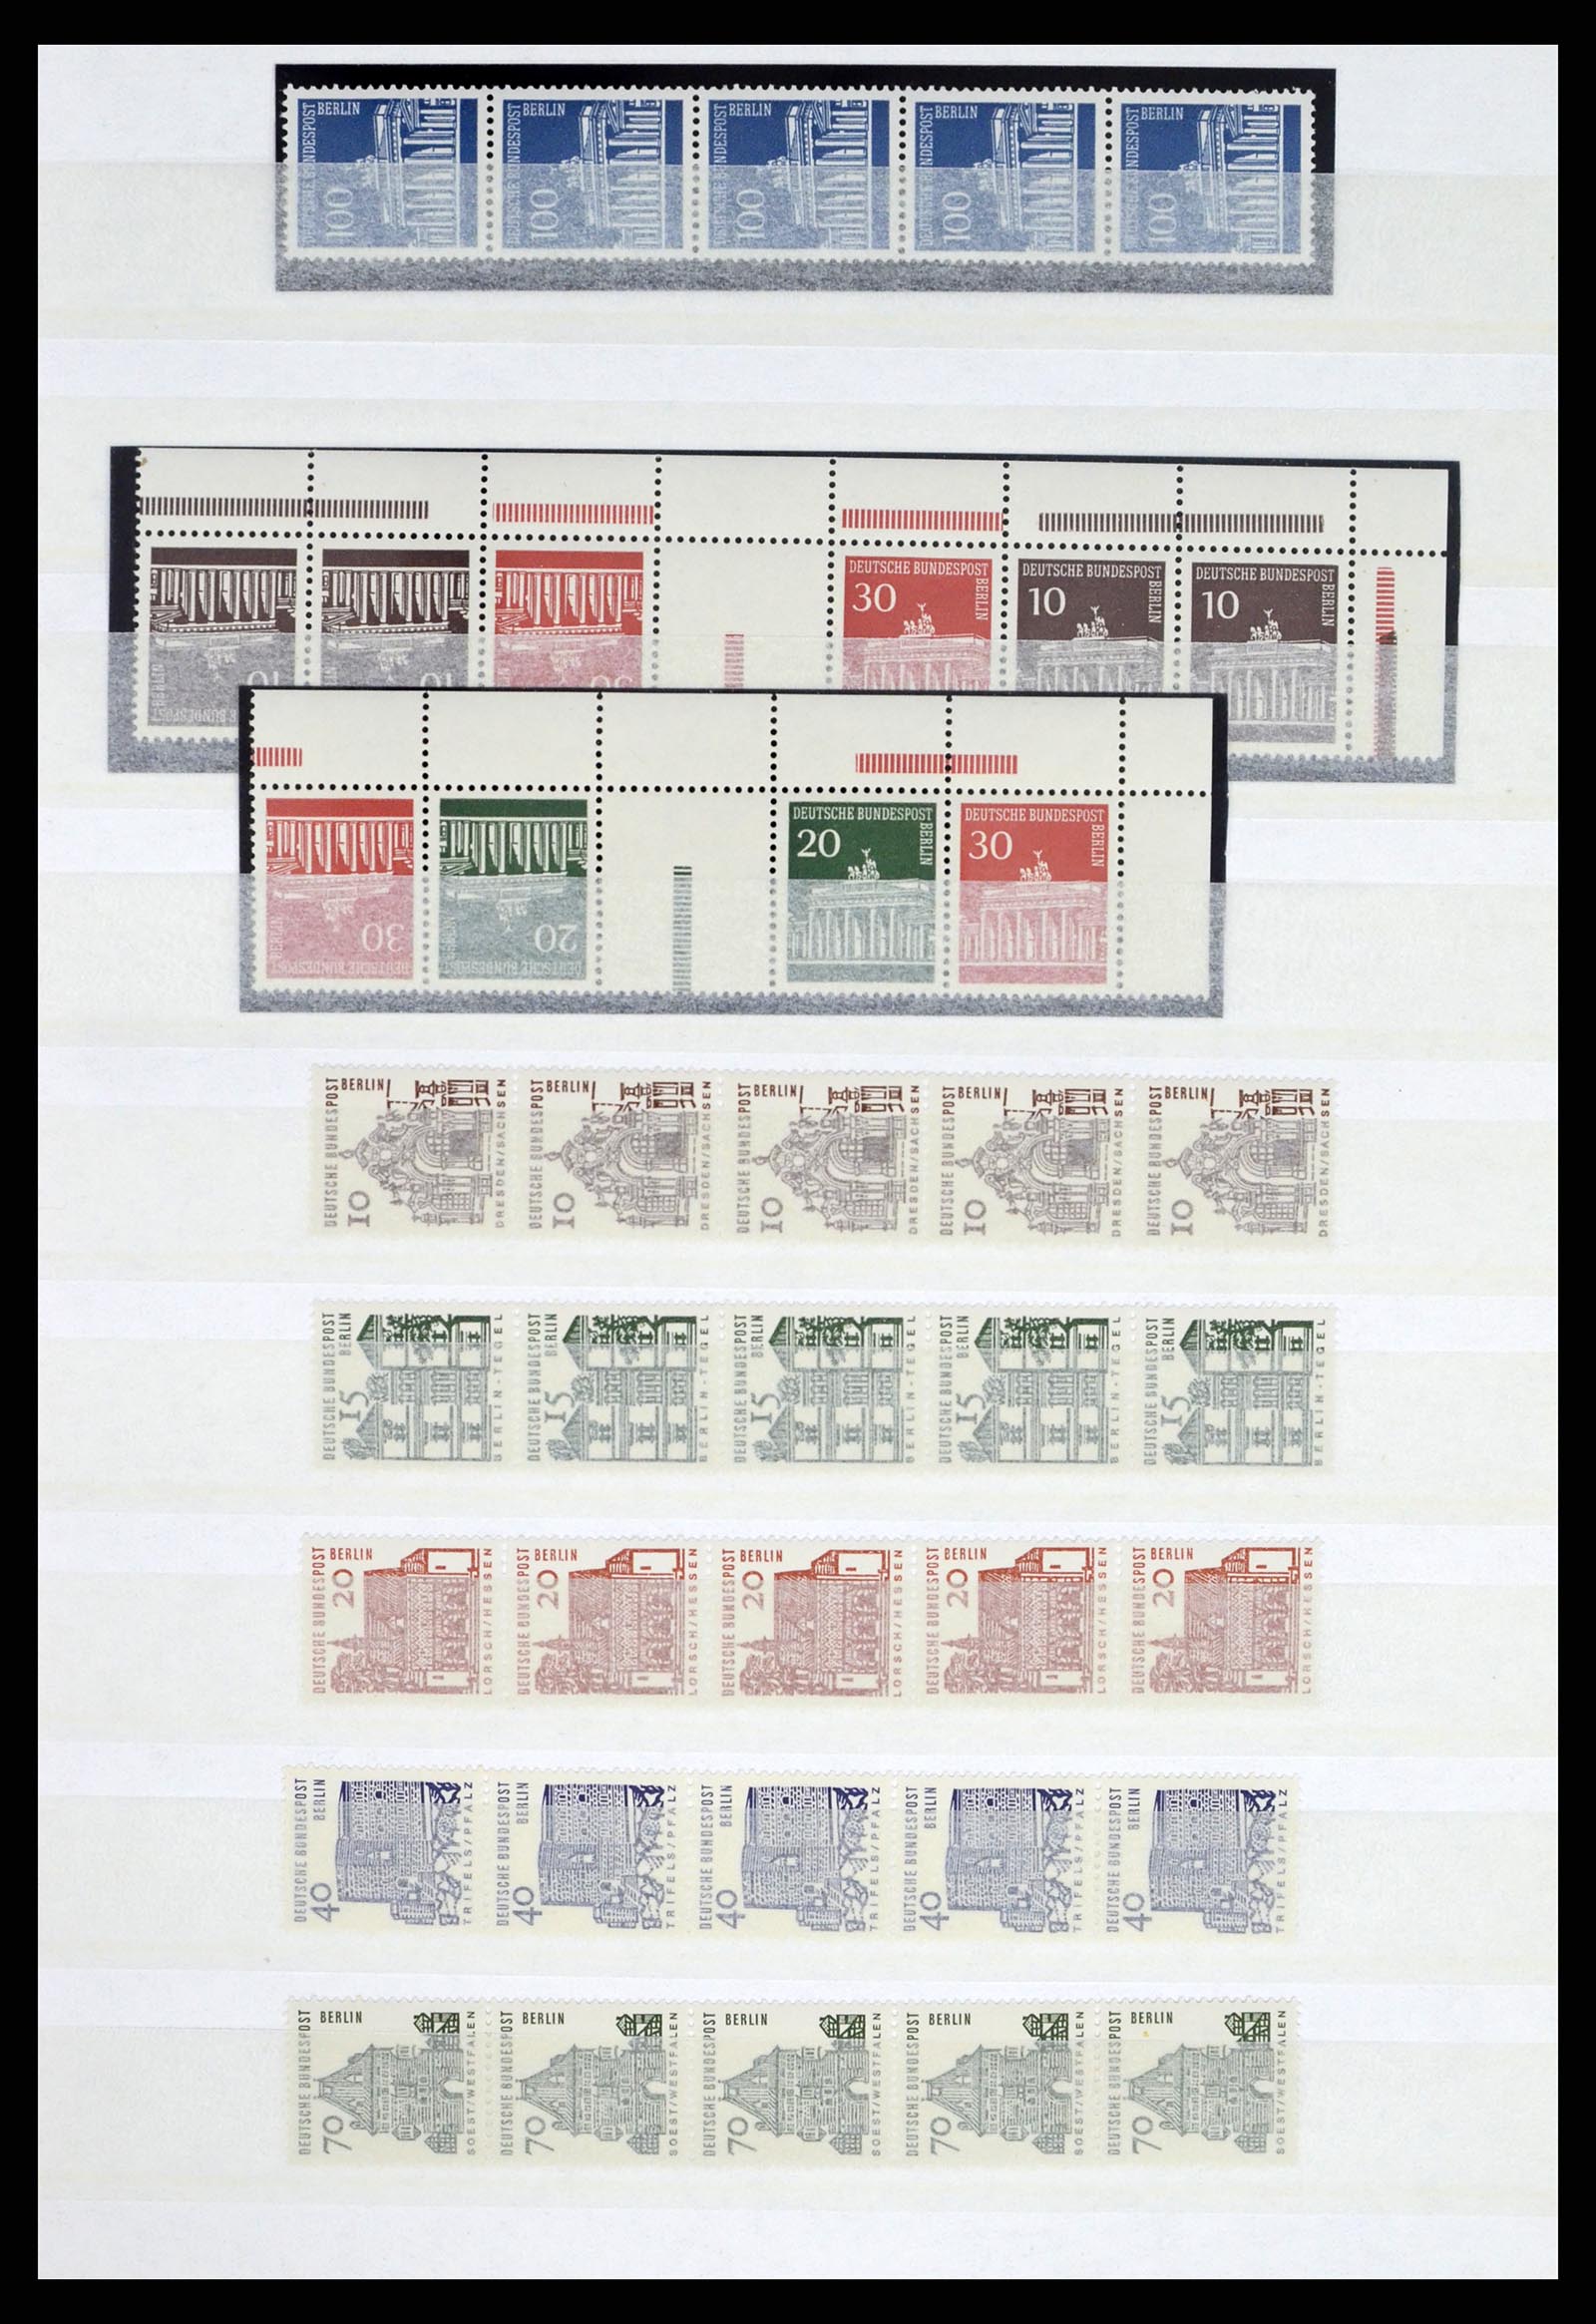 37354 096 - Stamp collection 37354 Bundespost and Berlin 1955-2000.